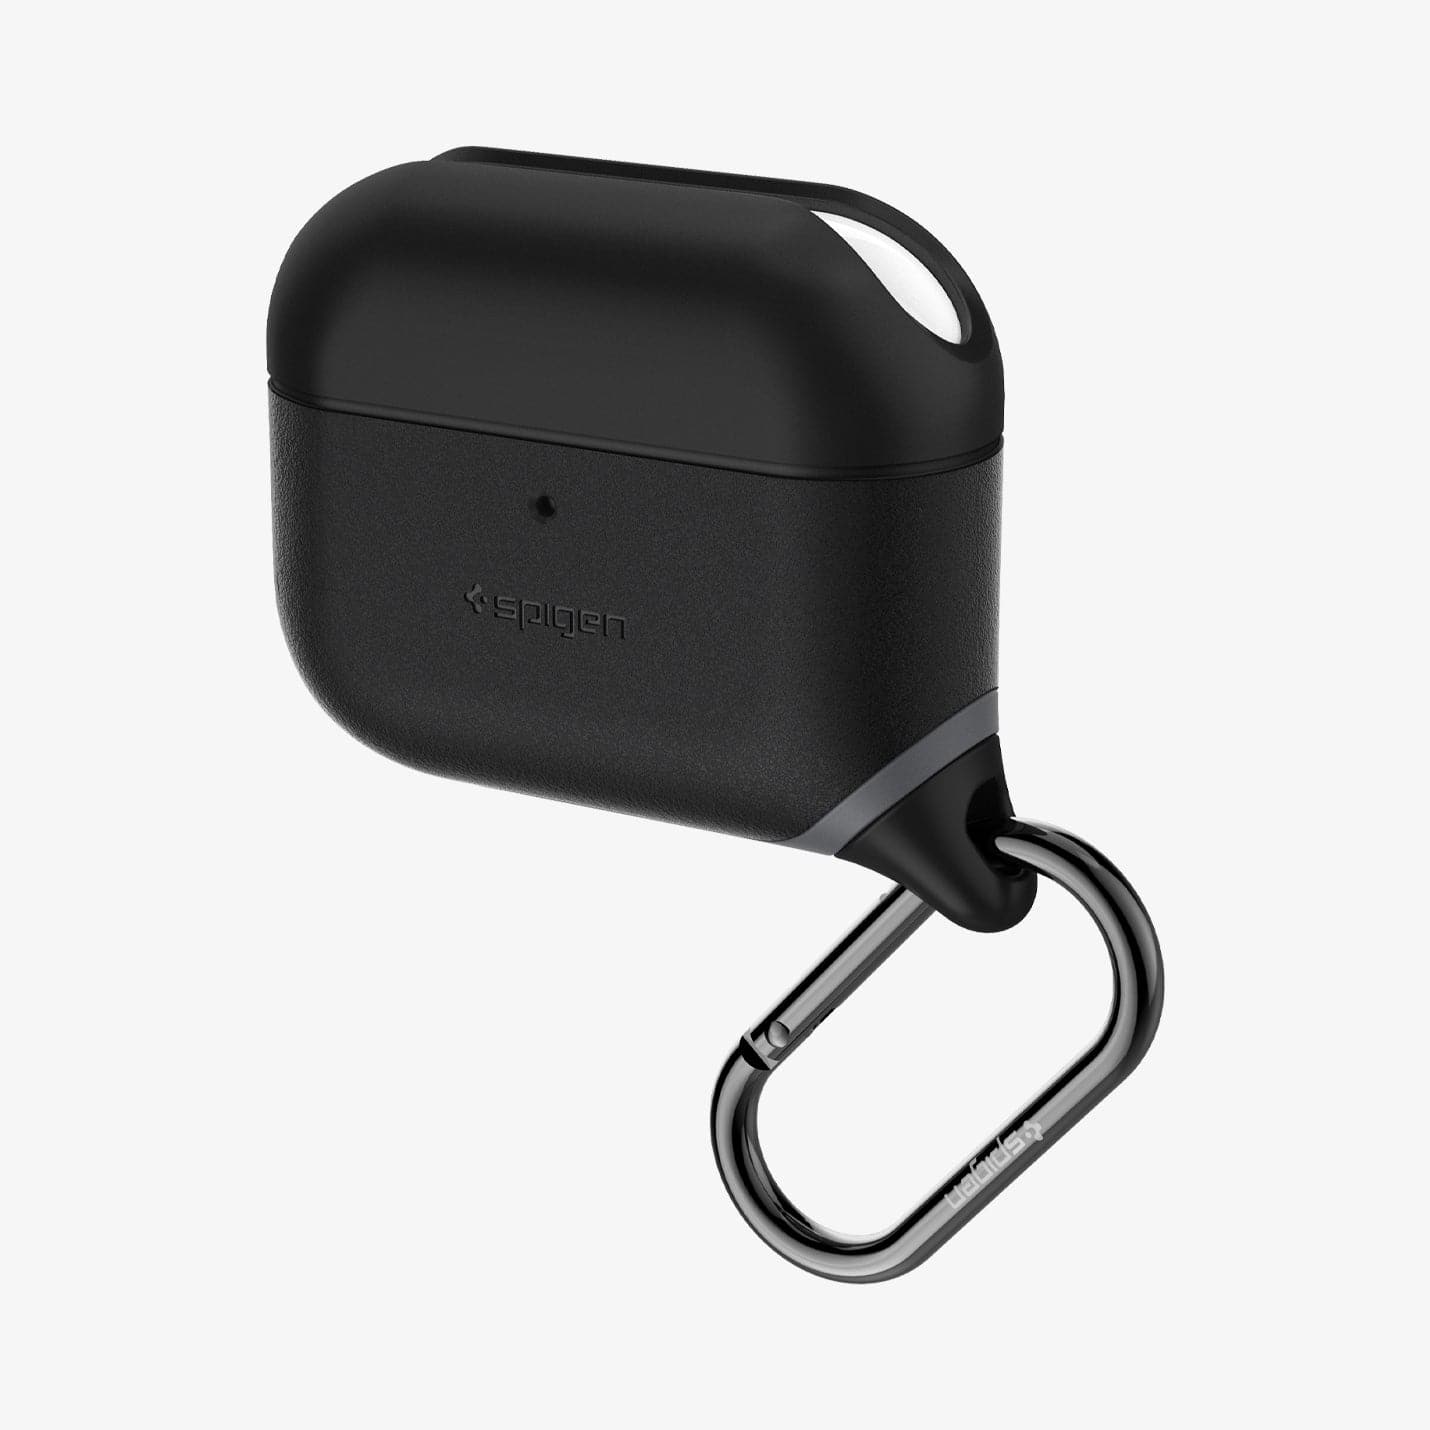 ASD00542 - Apple AirPods Pro / AirPods Pro 2 Case Slim Armor IP in black showing the front, side and carabiner